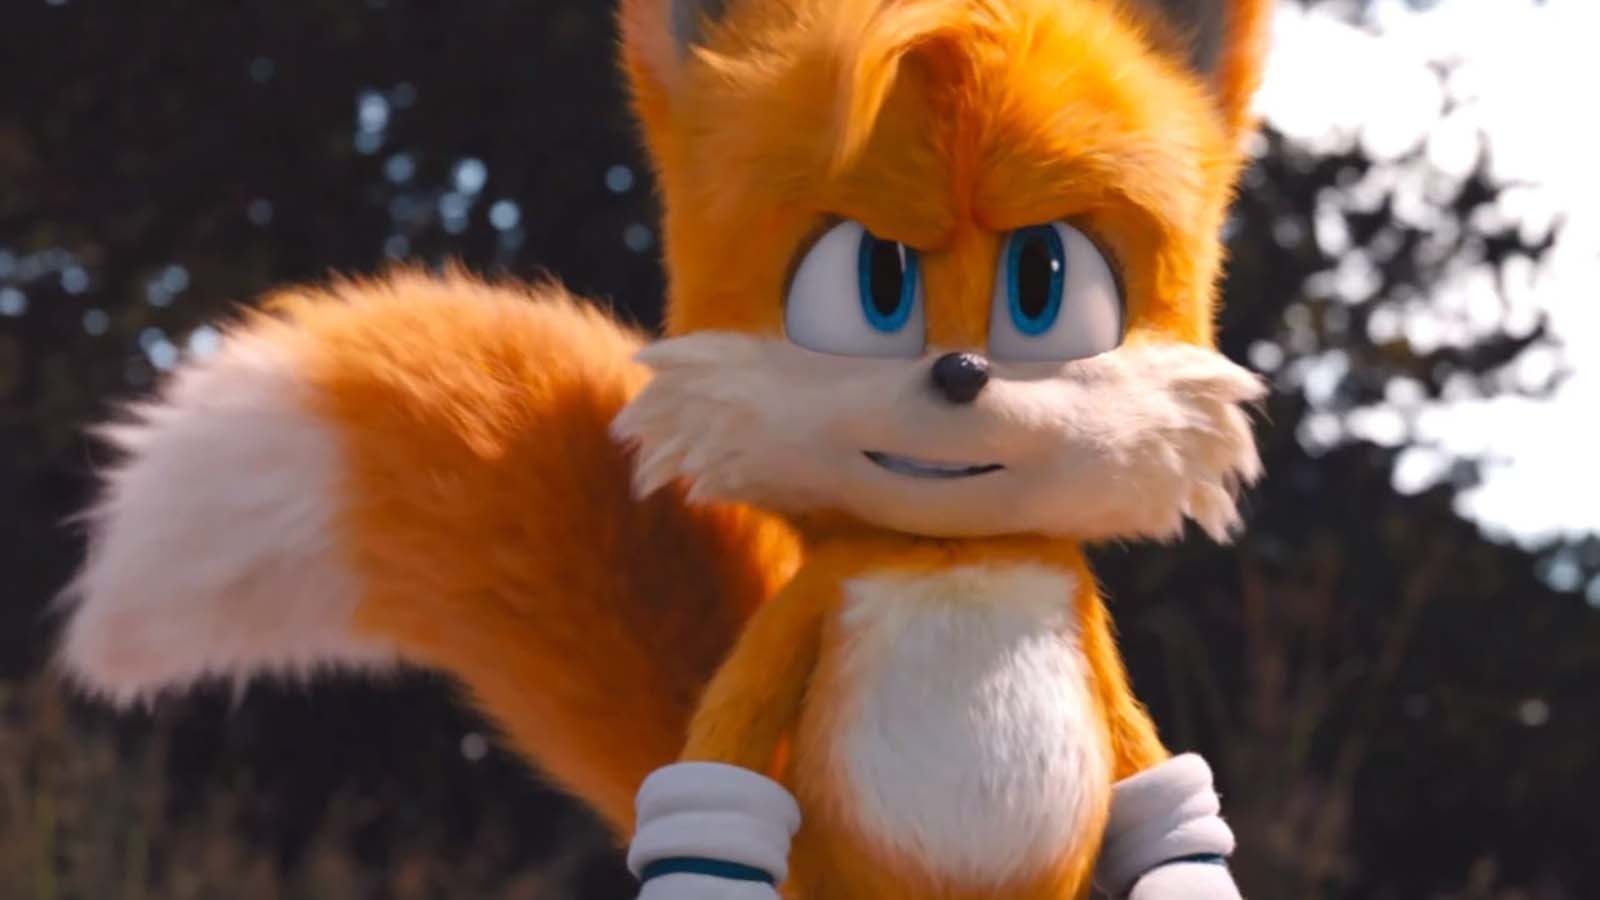 Sonic the Hedgehog 2 Special Features Clip Is All About Tails (Exclusive)